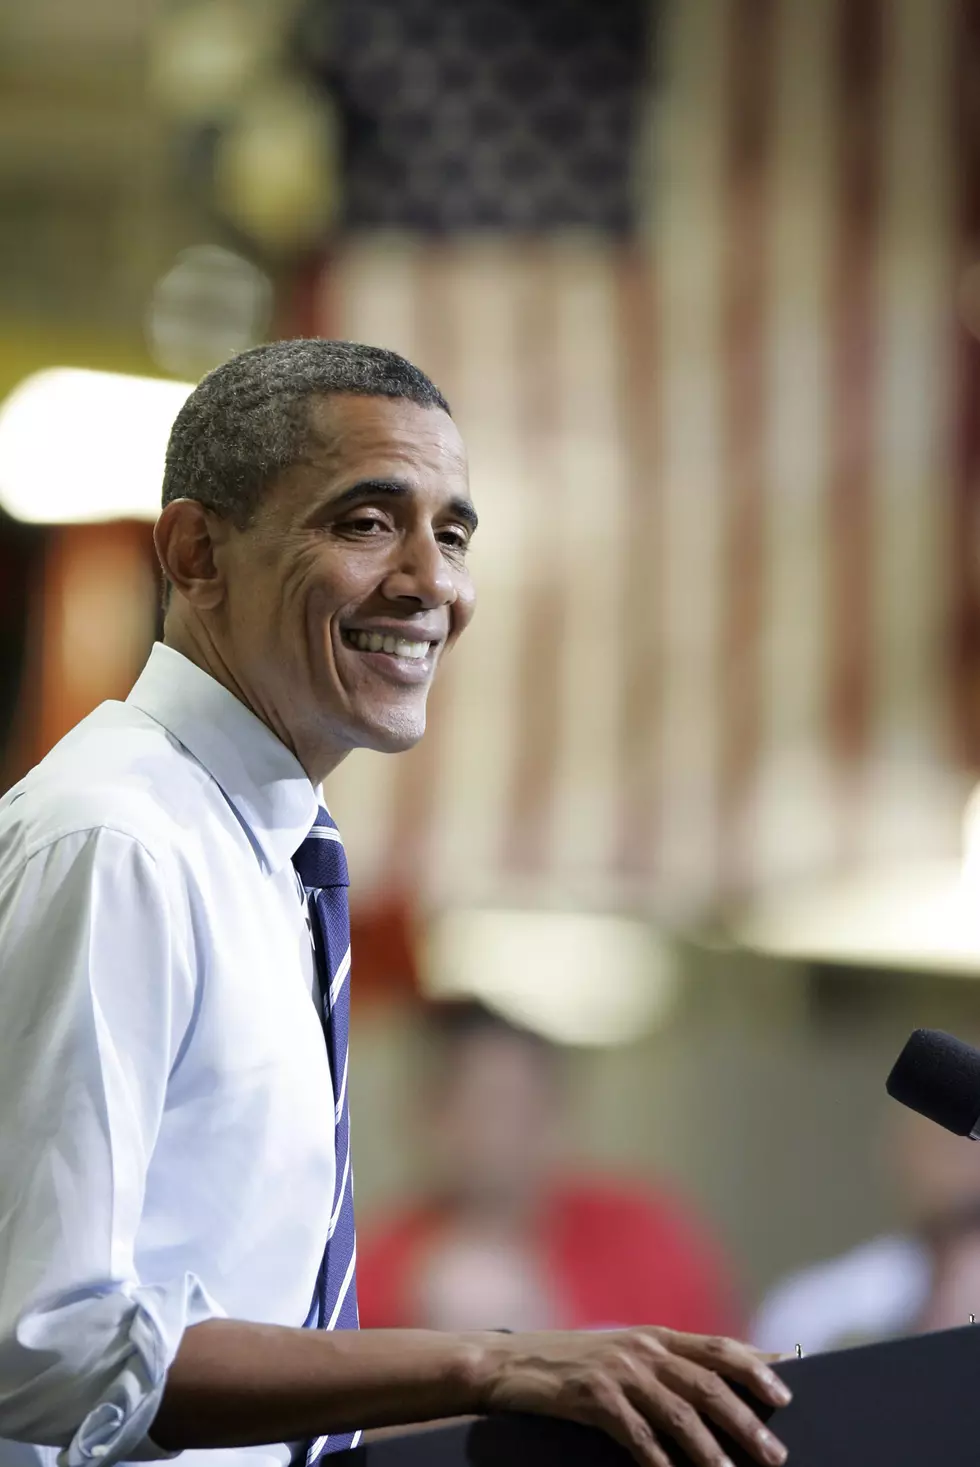 President Obama Eats Chili Dogs, NATO Land War in Libya, and Much More in Chad&#8217;s Steaming Pile